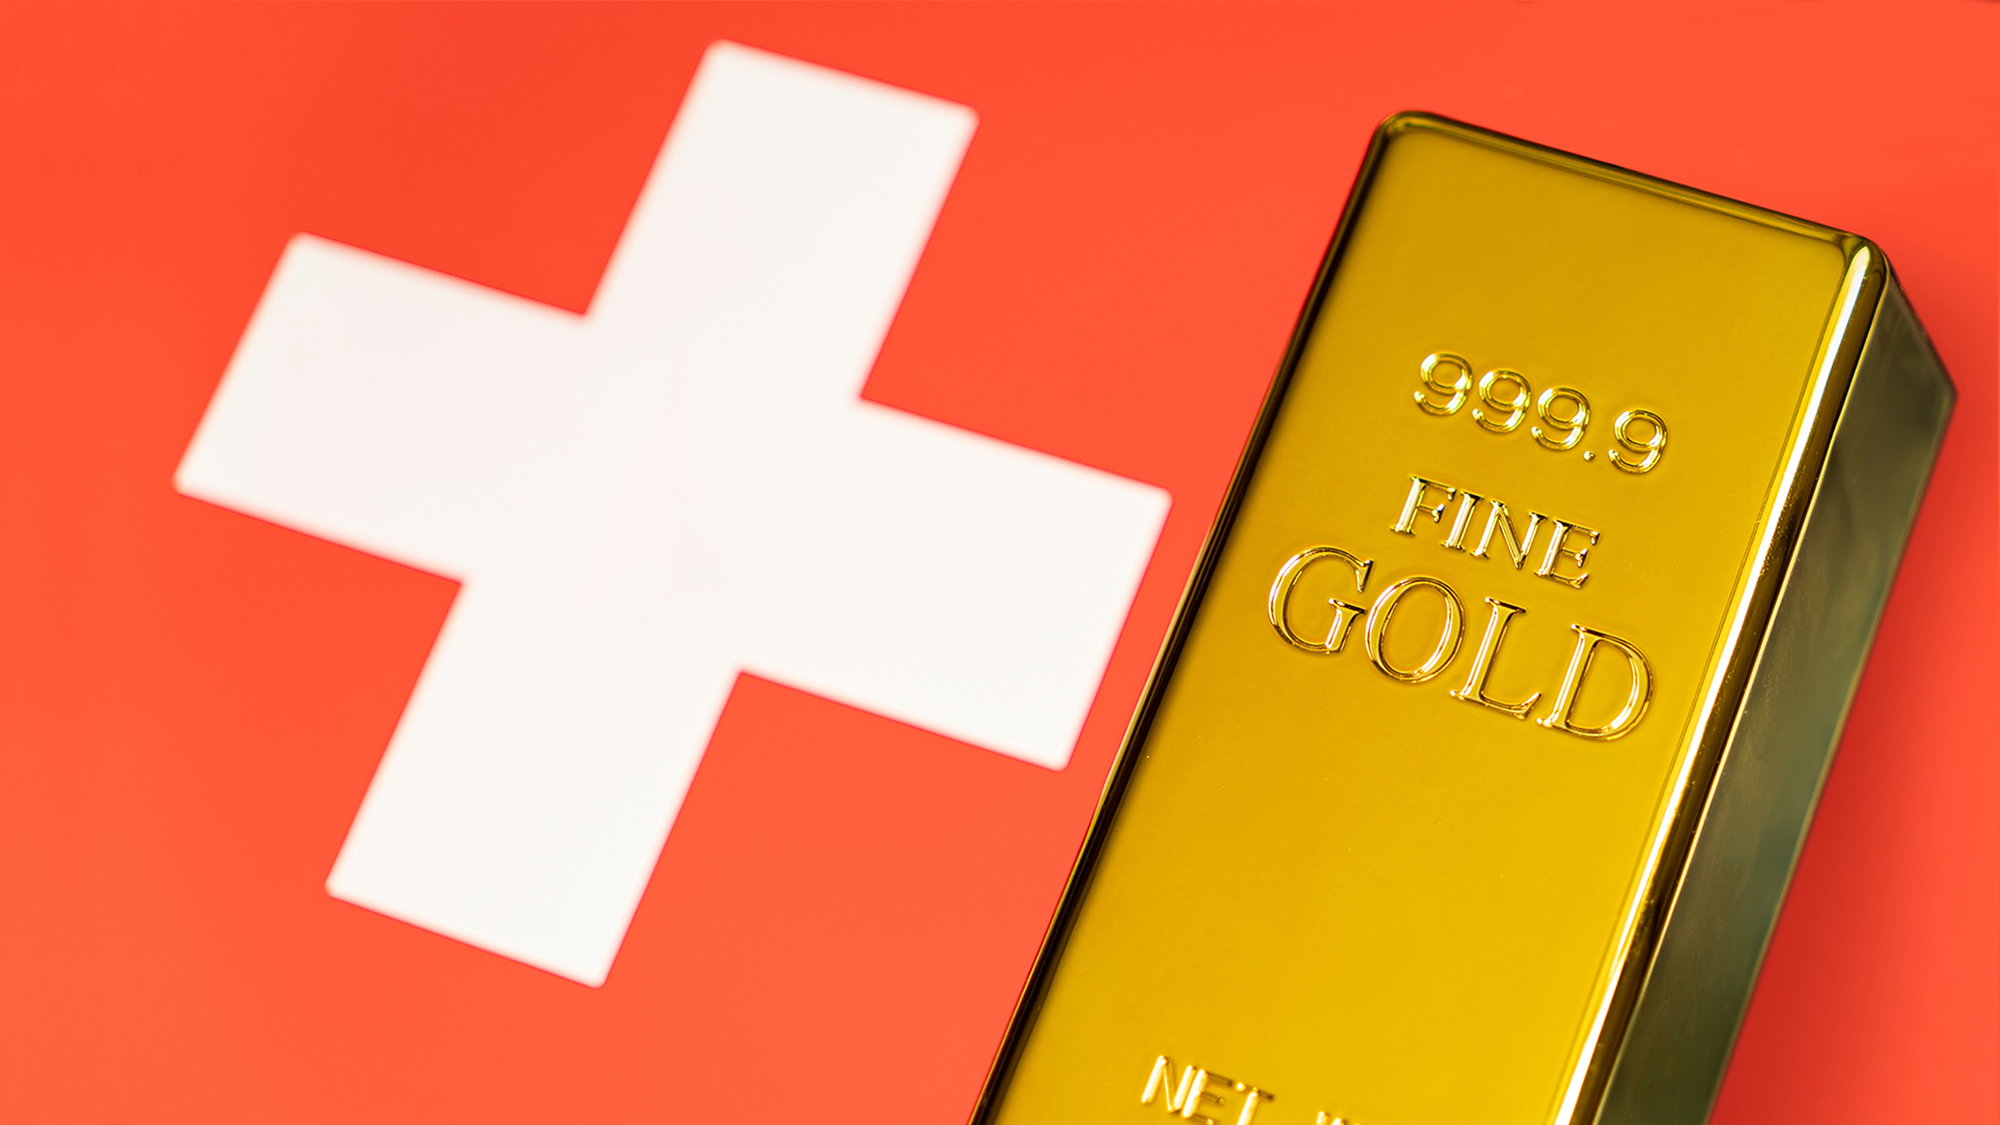 SwissGold Crypto AG, based in the Crypto Valley Zug, is a Swiss-regulated financial intermediary and offers easy access to purchase gold in various bar sizes as a non-fungible token (NFT), which is tradable via the blockchain and can be exchanged for the physically backed bar at any time.